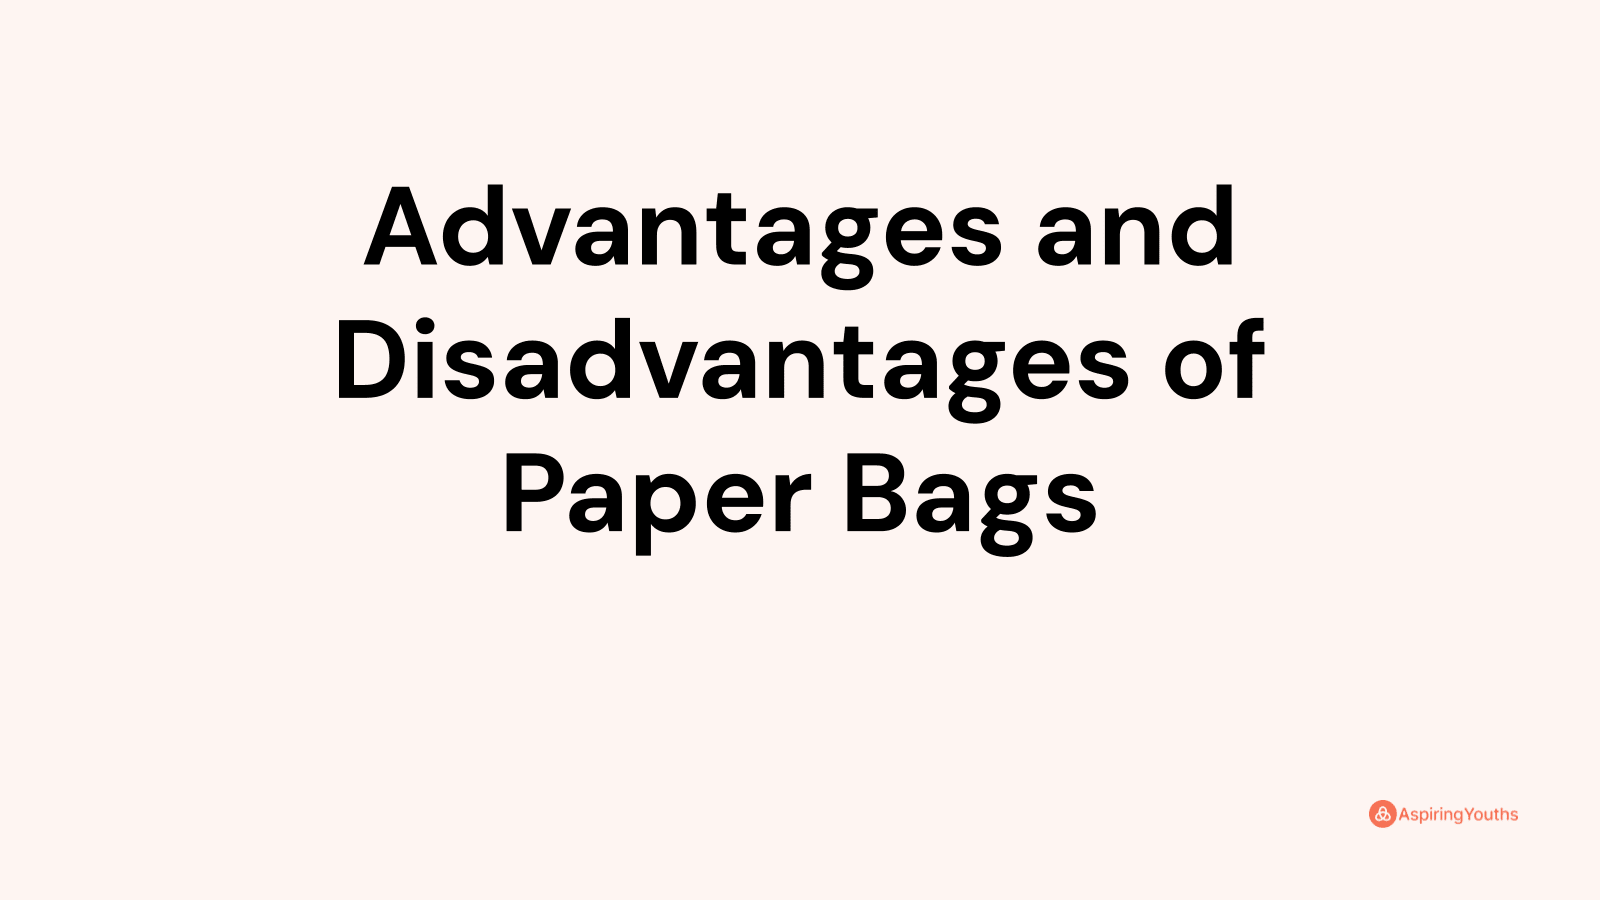 Advantages and disadvantages of Paper Bags